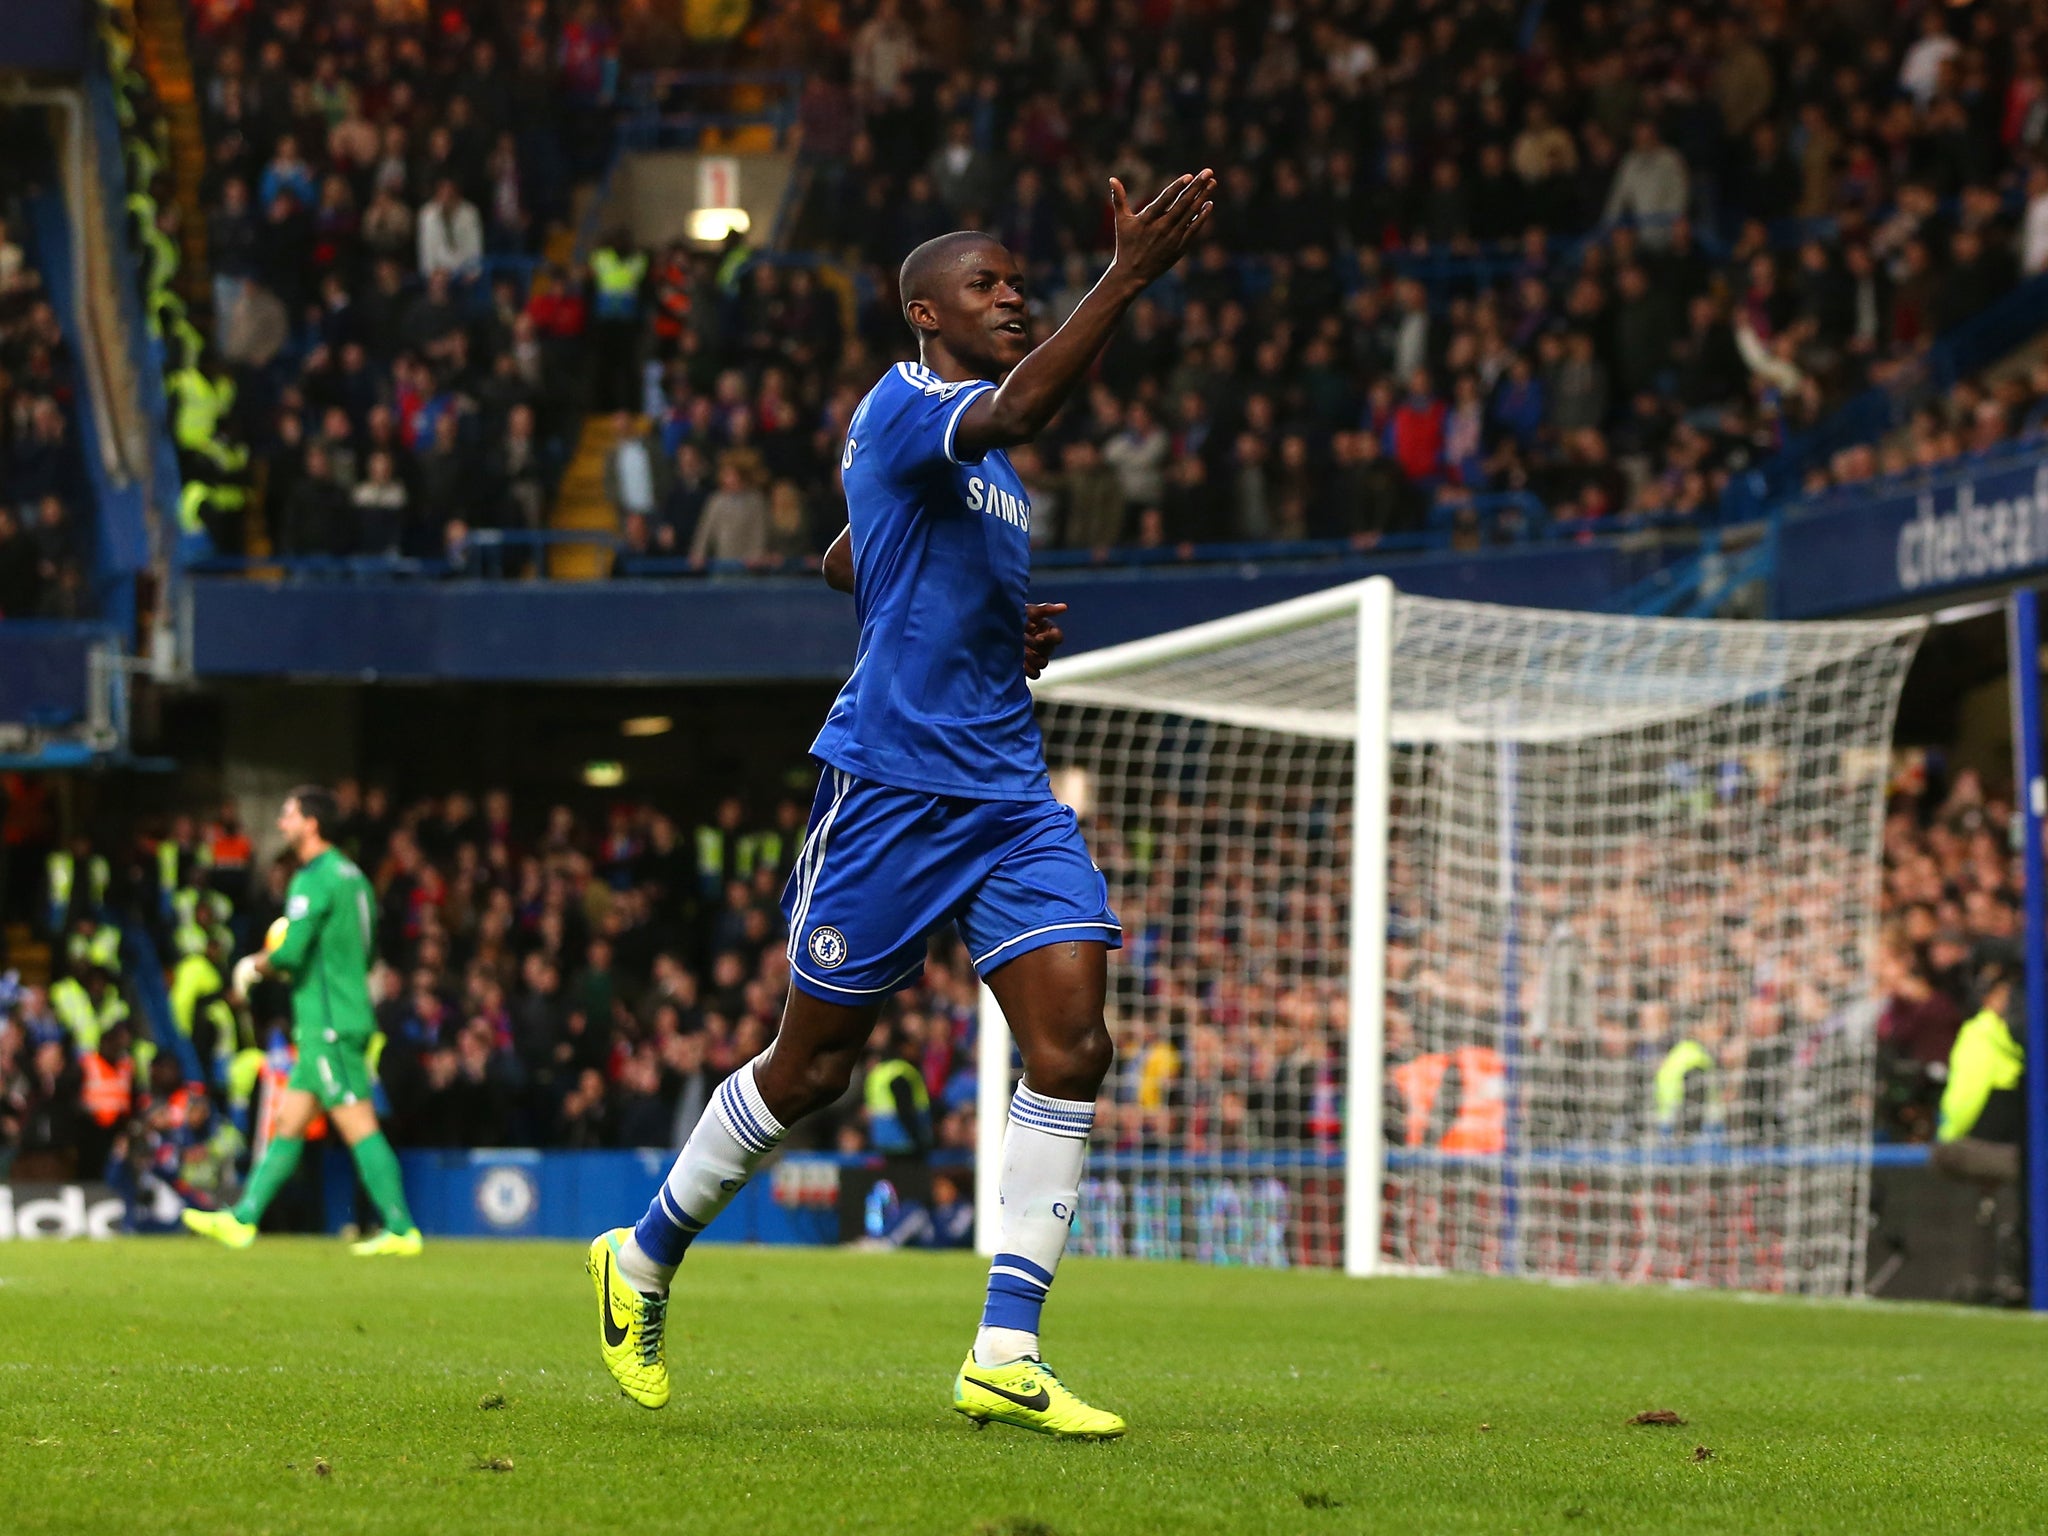 Chelsea midfielder Ramires celebrates scoring the iwnner against Crystal Palace